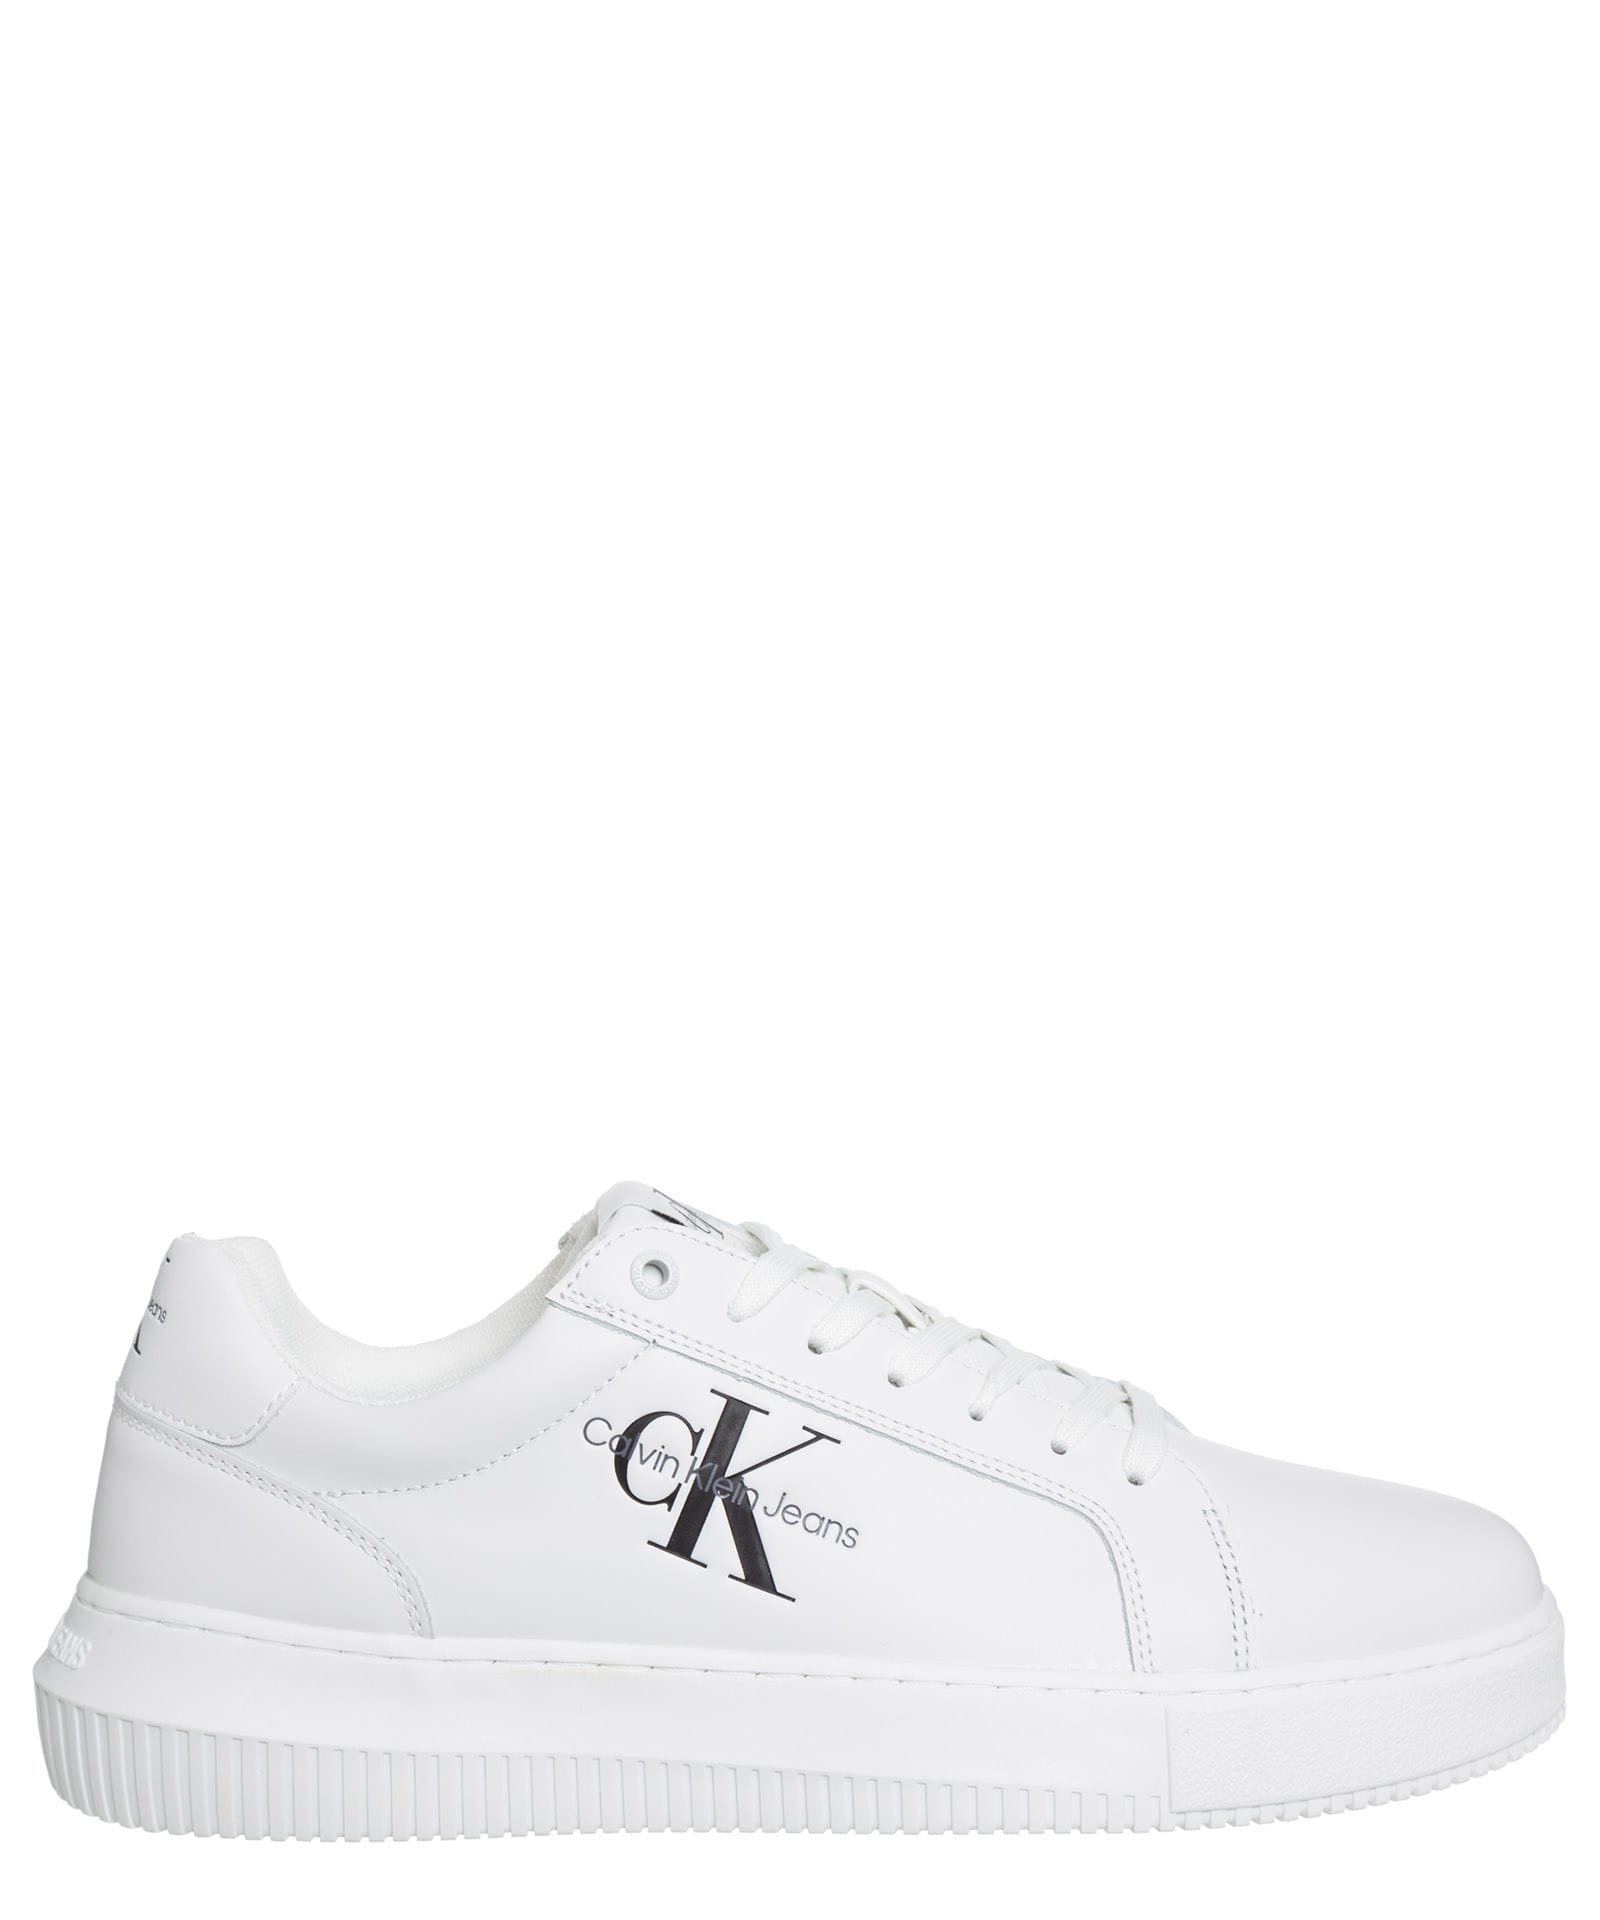 Calvin Klein Jeans Est.1978 Leather Sneakers In White - Black